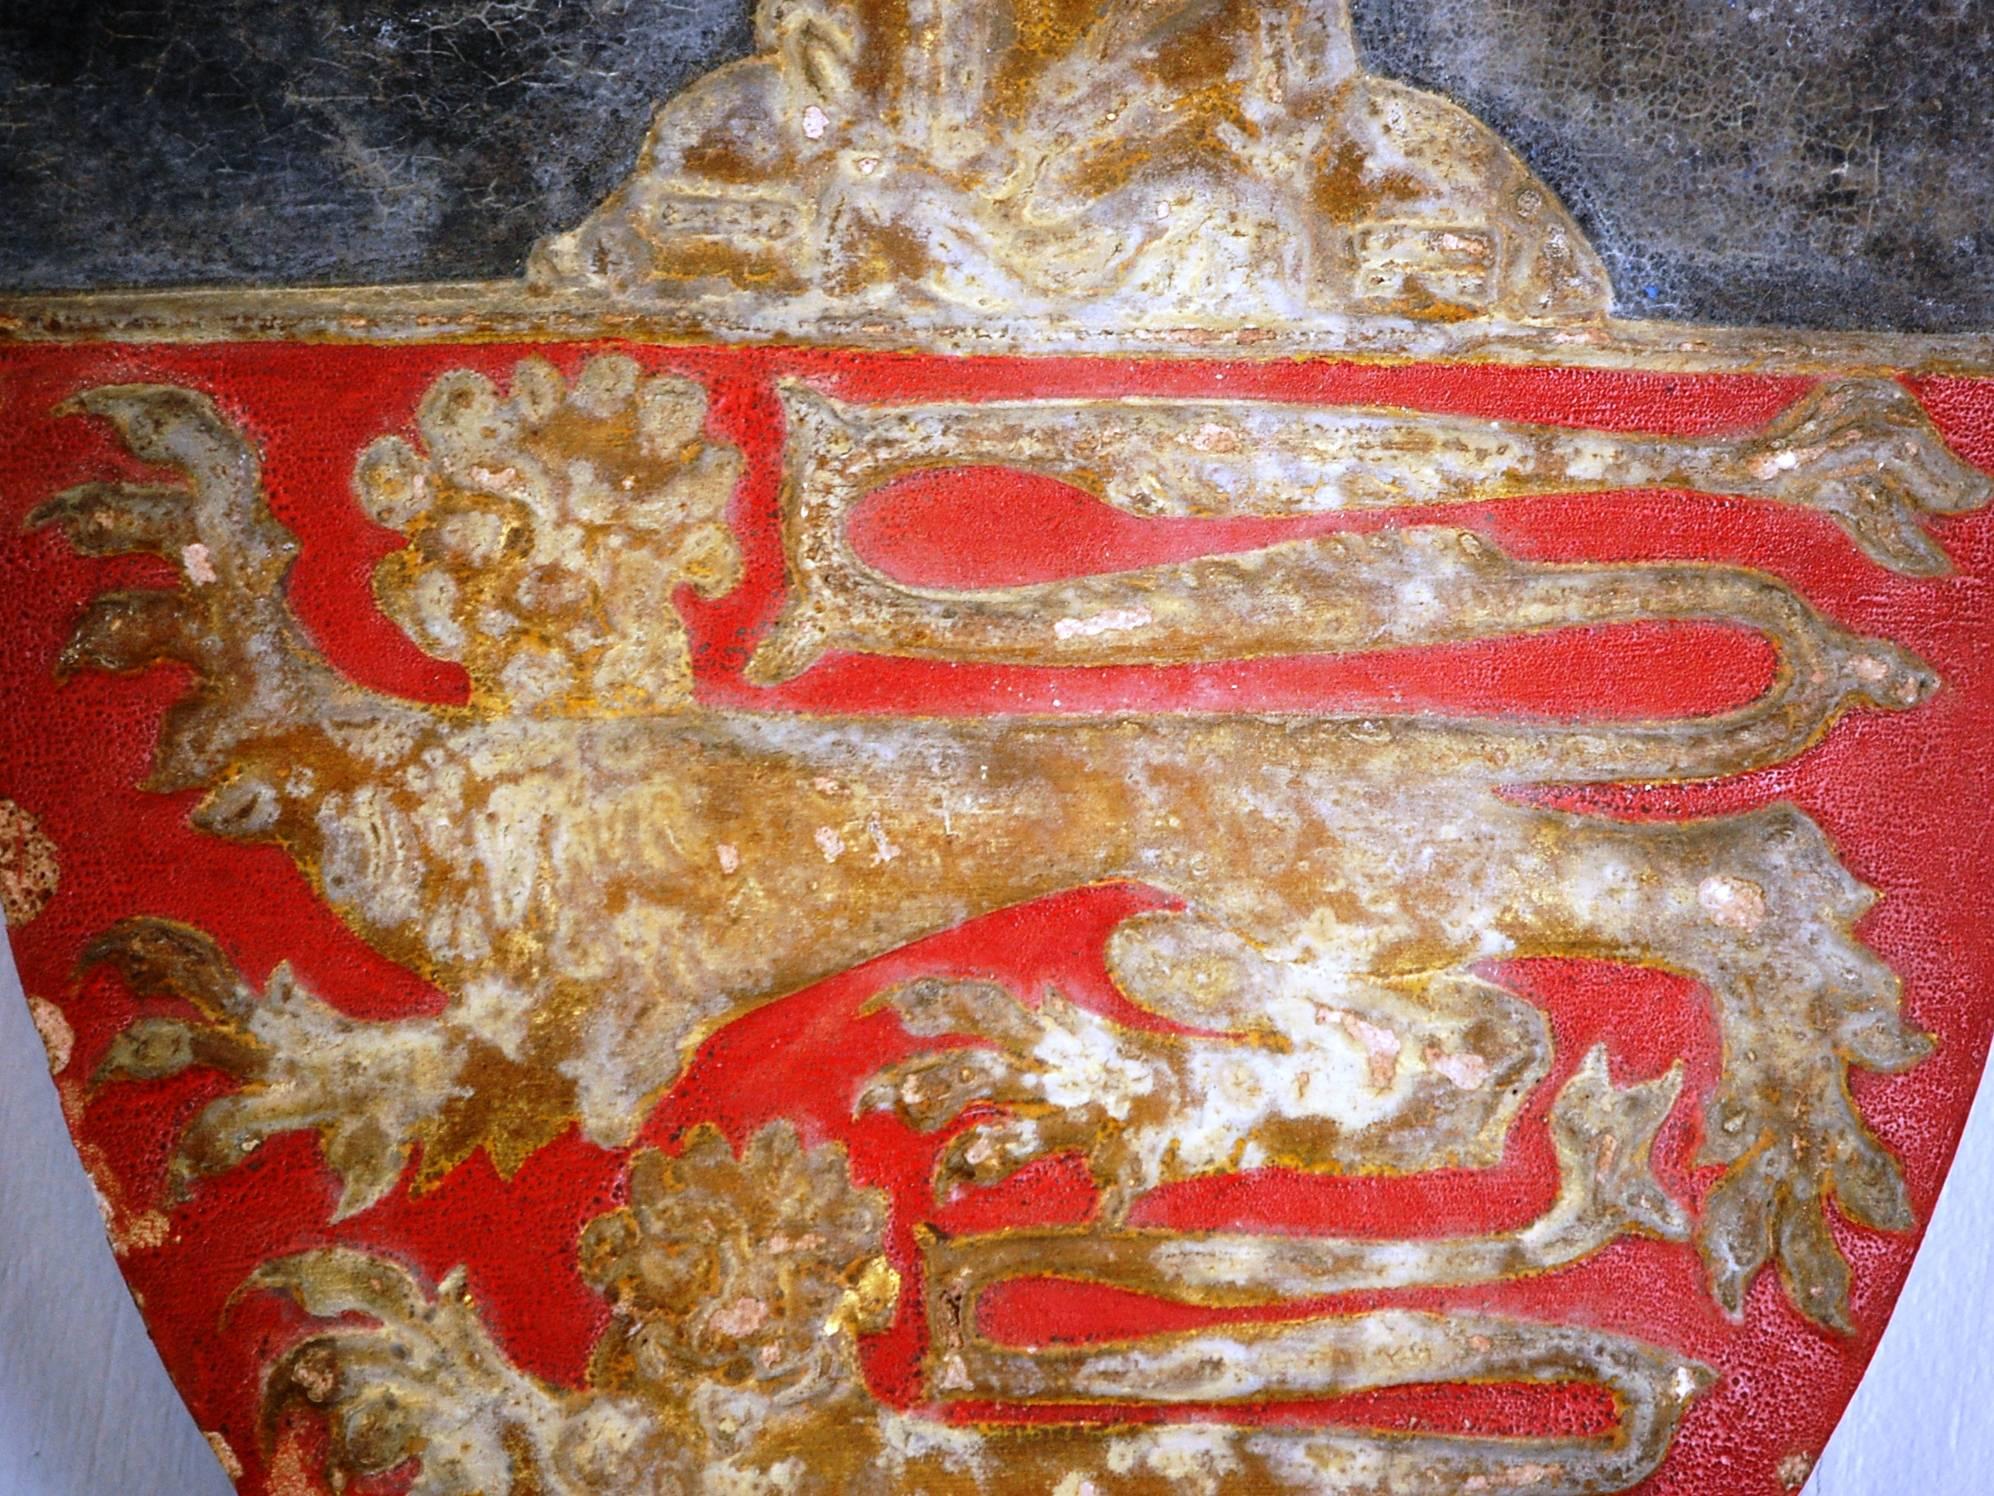 Early 20th century warrant shield in plaster and original distressed paint, remnant gilding still present. Signed and dated (1912) to the rear. With further indistinct script.